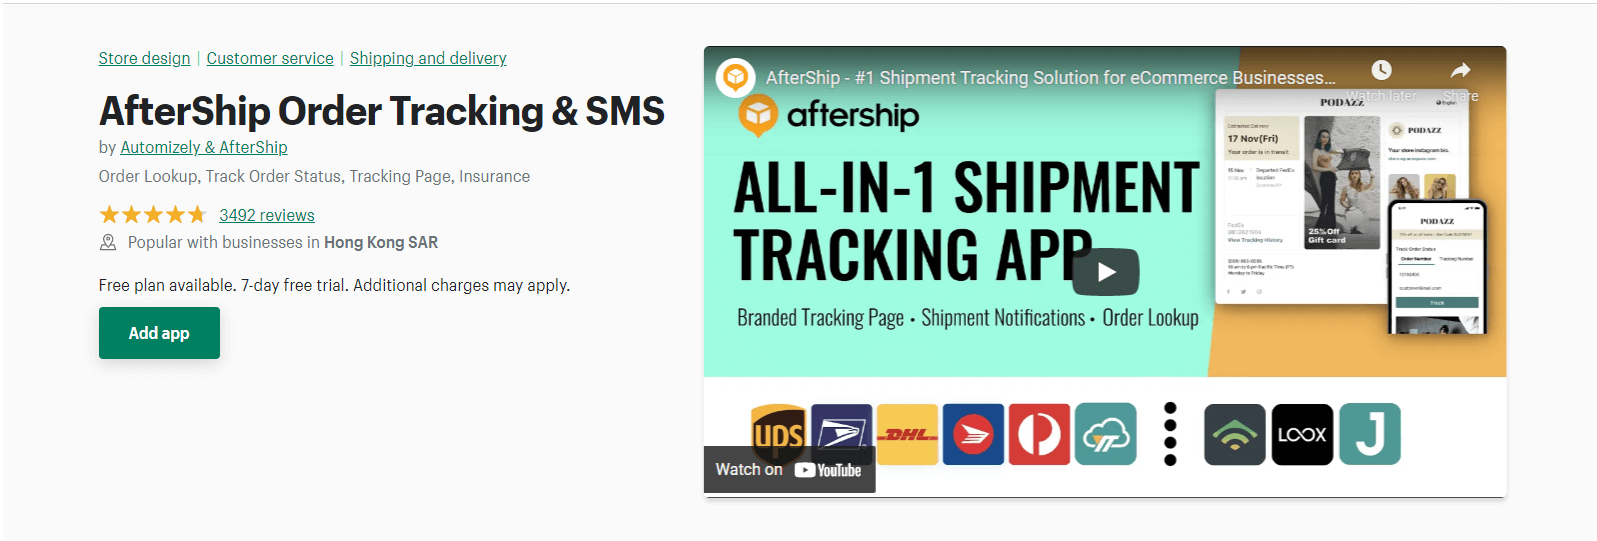 Shopify-AfterShip order tracking